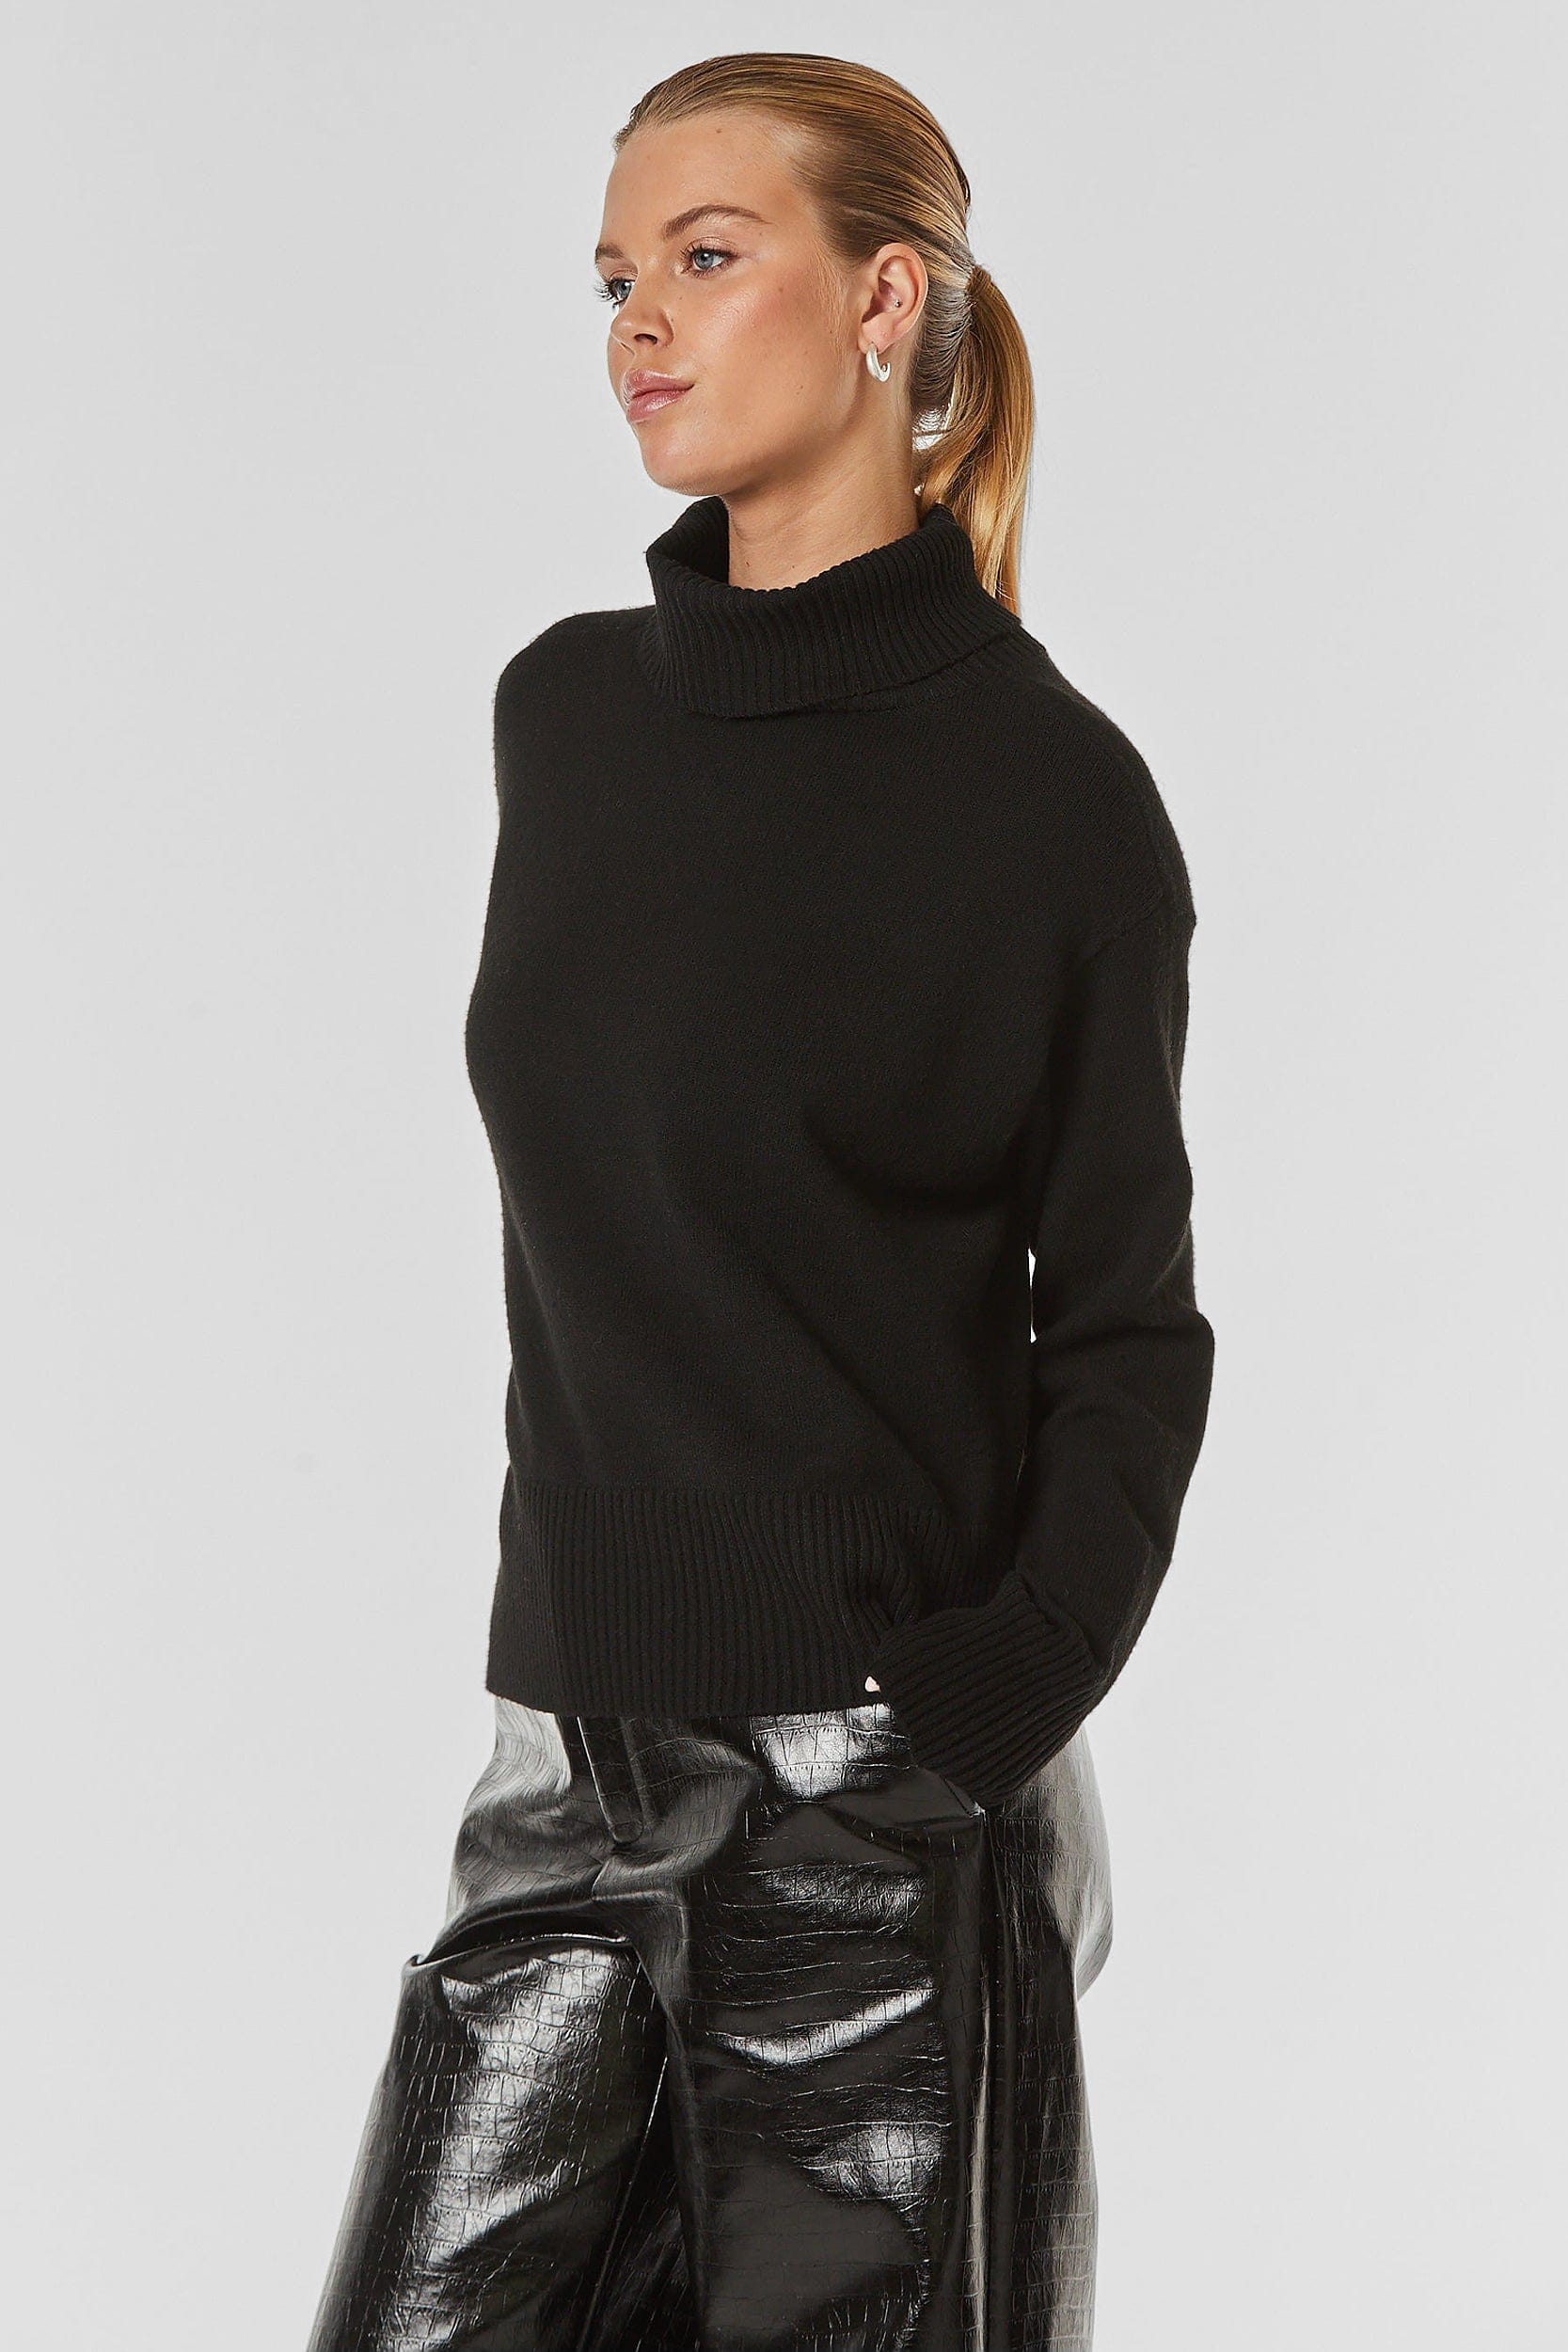 A person with blonde hair tied back in a ponytail is wearing the Gia Oversized Sweater in black and shiny black pants. They are standing against a plain grey background with one hand in their pocket, looking to the side.